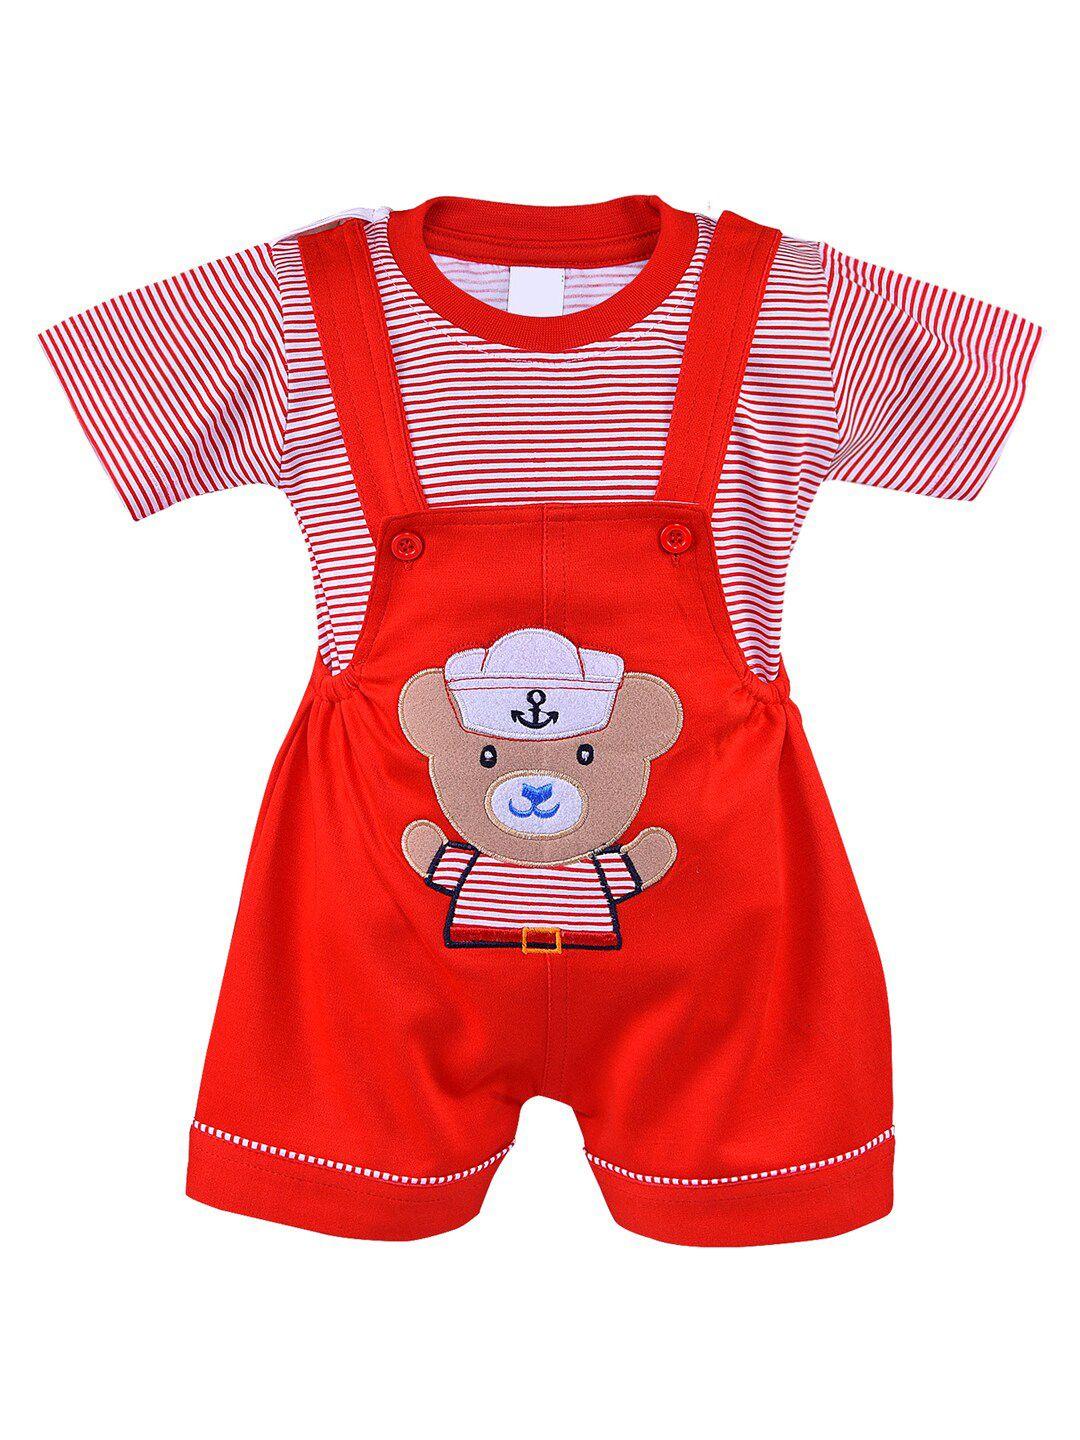 wish karo kids boys red and white striped t shirt with bear applique shorts